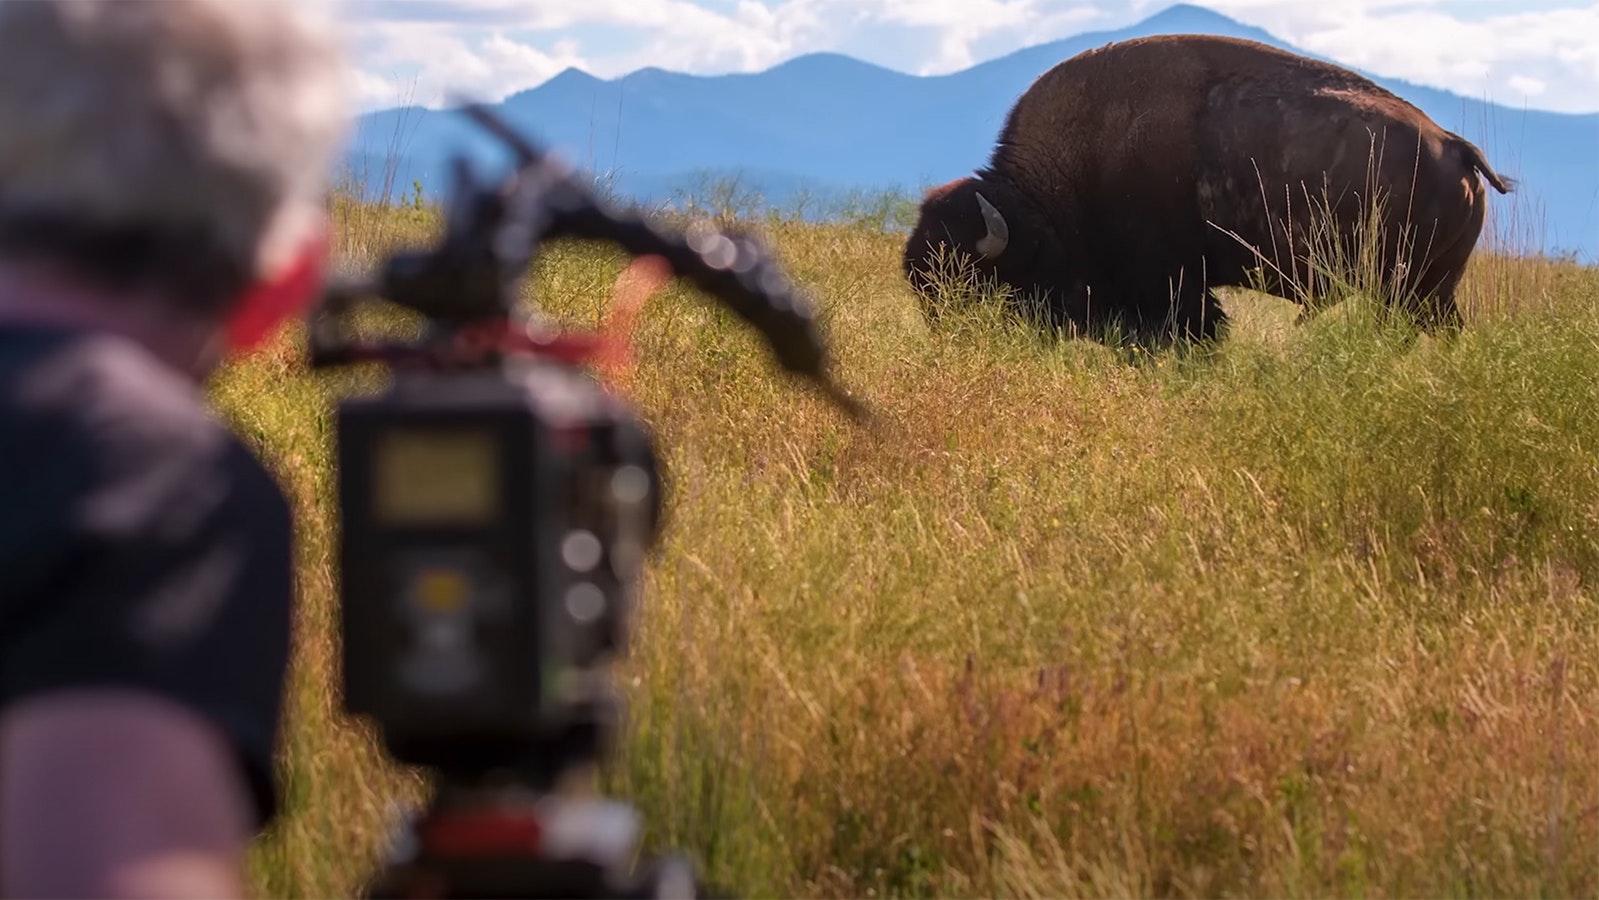 A camera operator films while making a new Ken Burns documentary on the American bison.